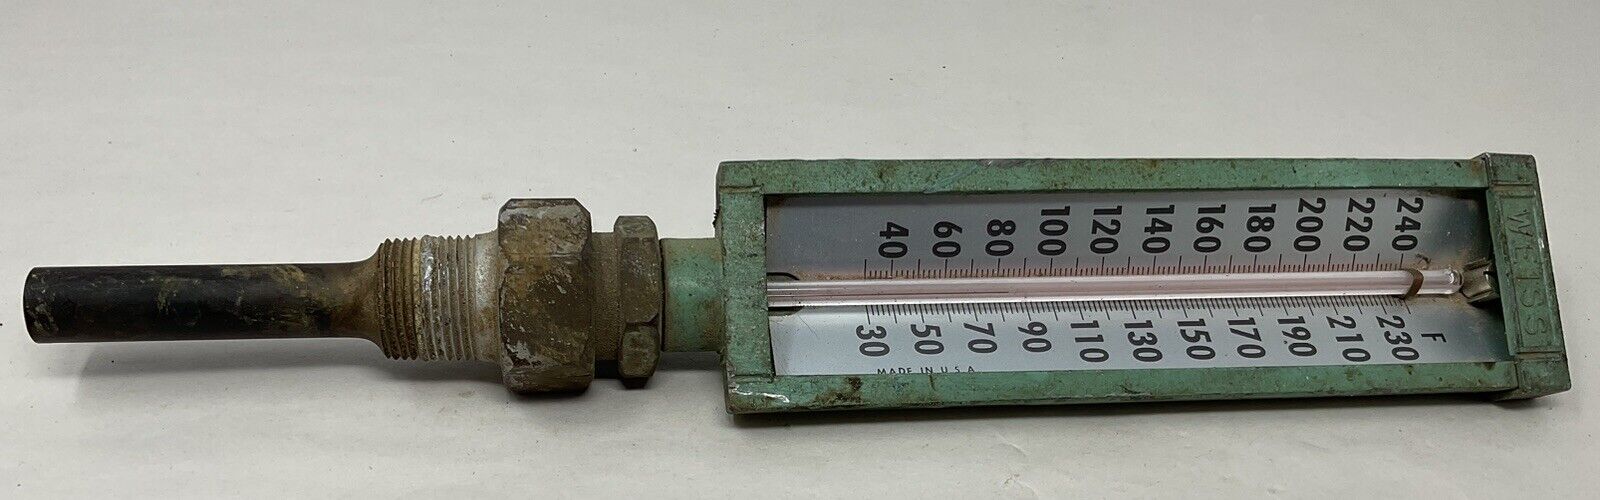 Vintage Weiss Instrument Variangle Thermometer 30-240F